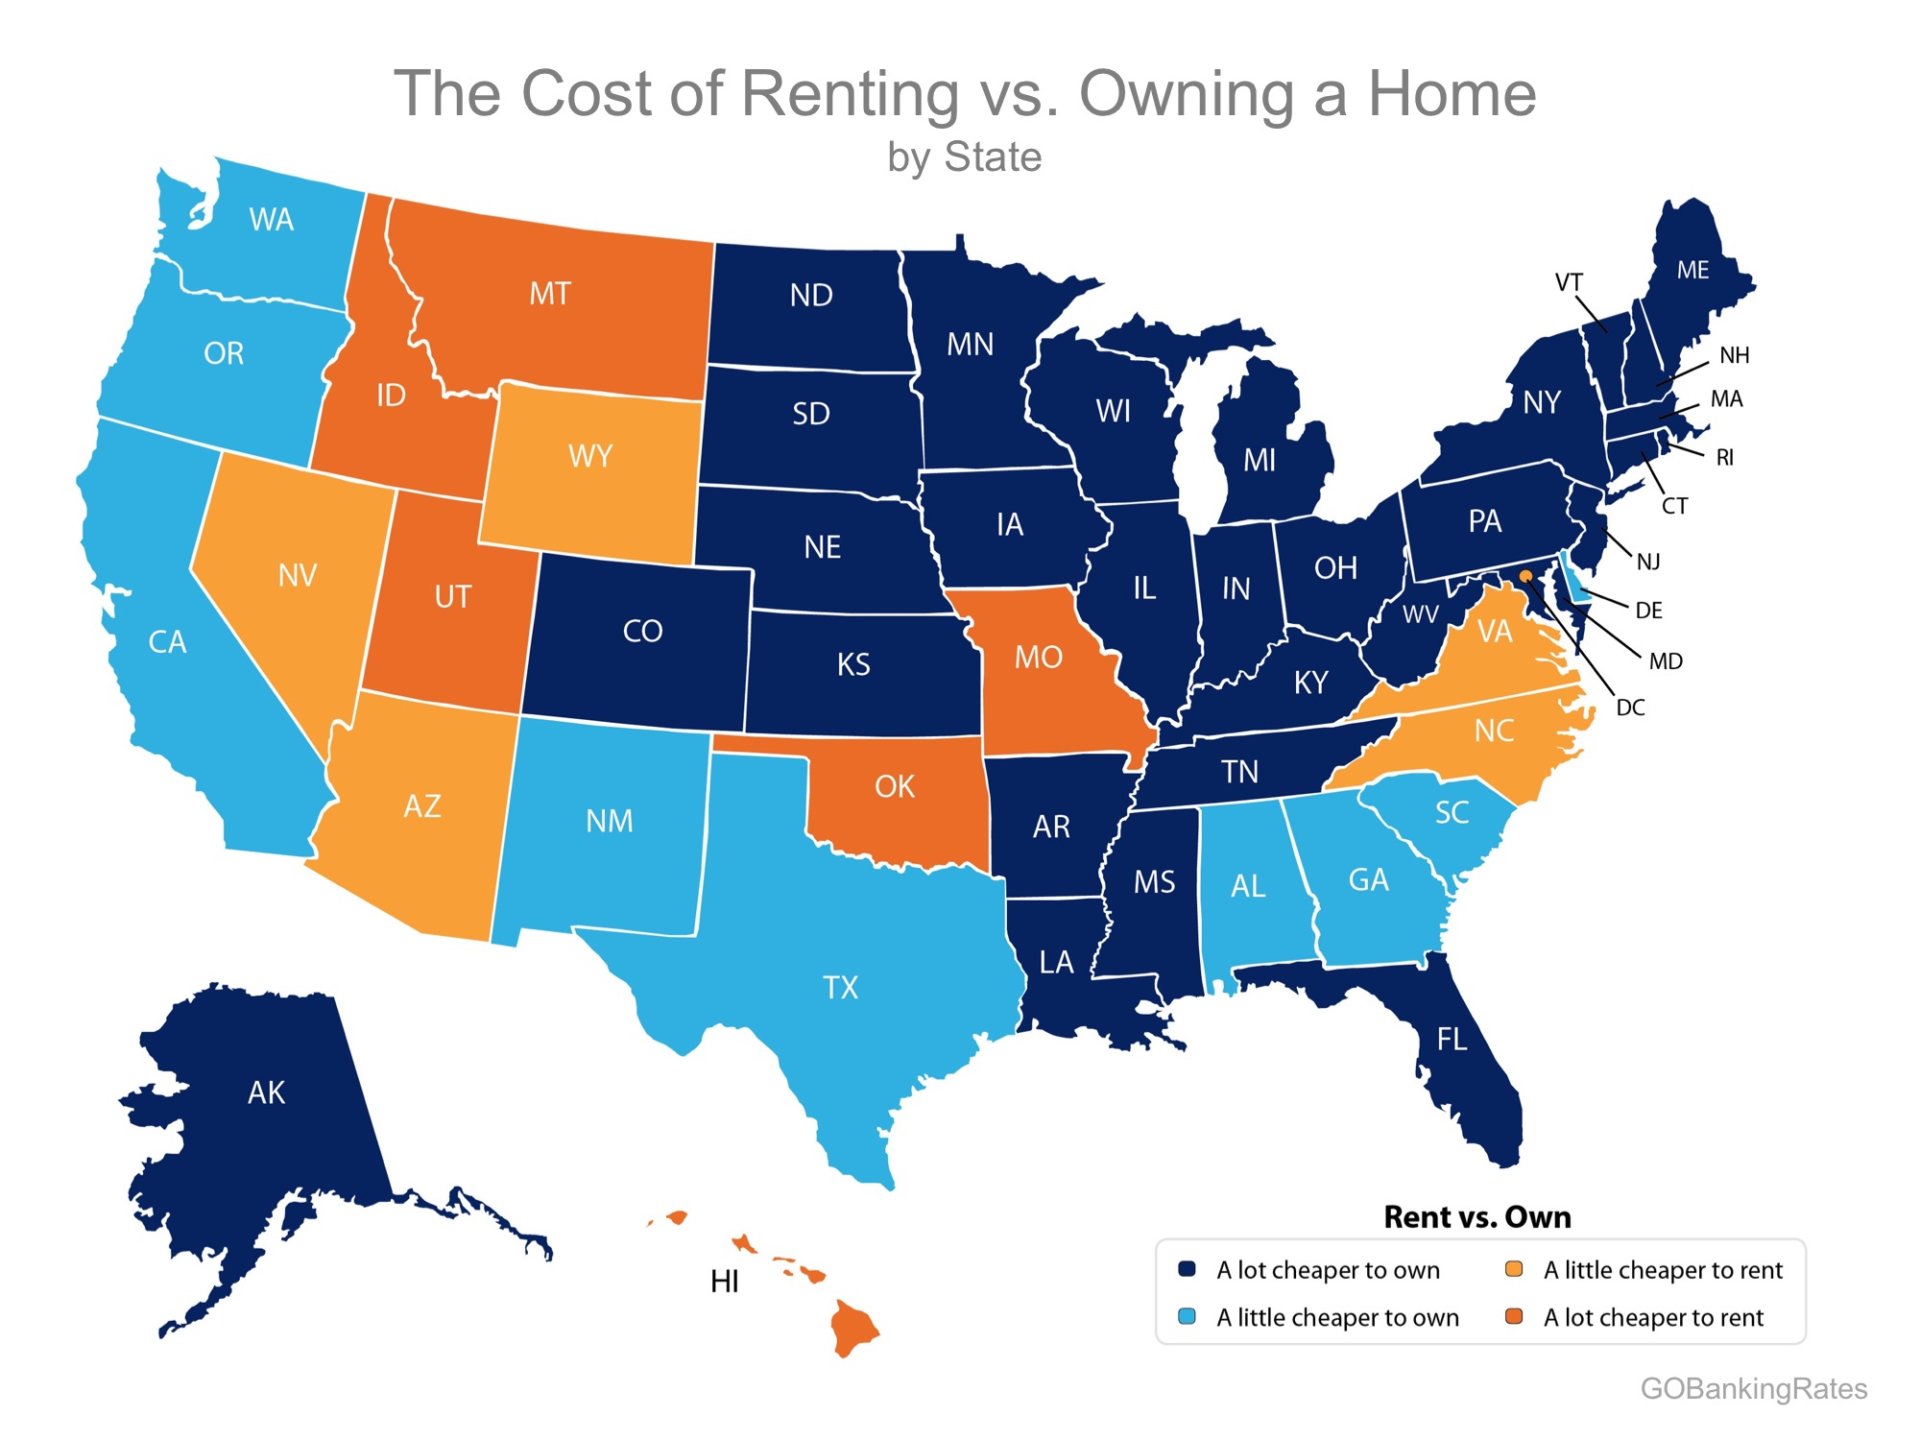 Buying Remains Cheaper Than Renting in 39 States! BrookHampton Realty